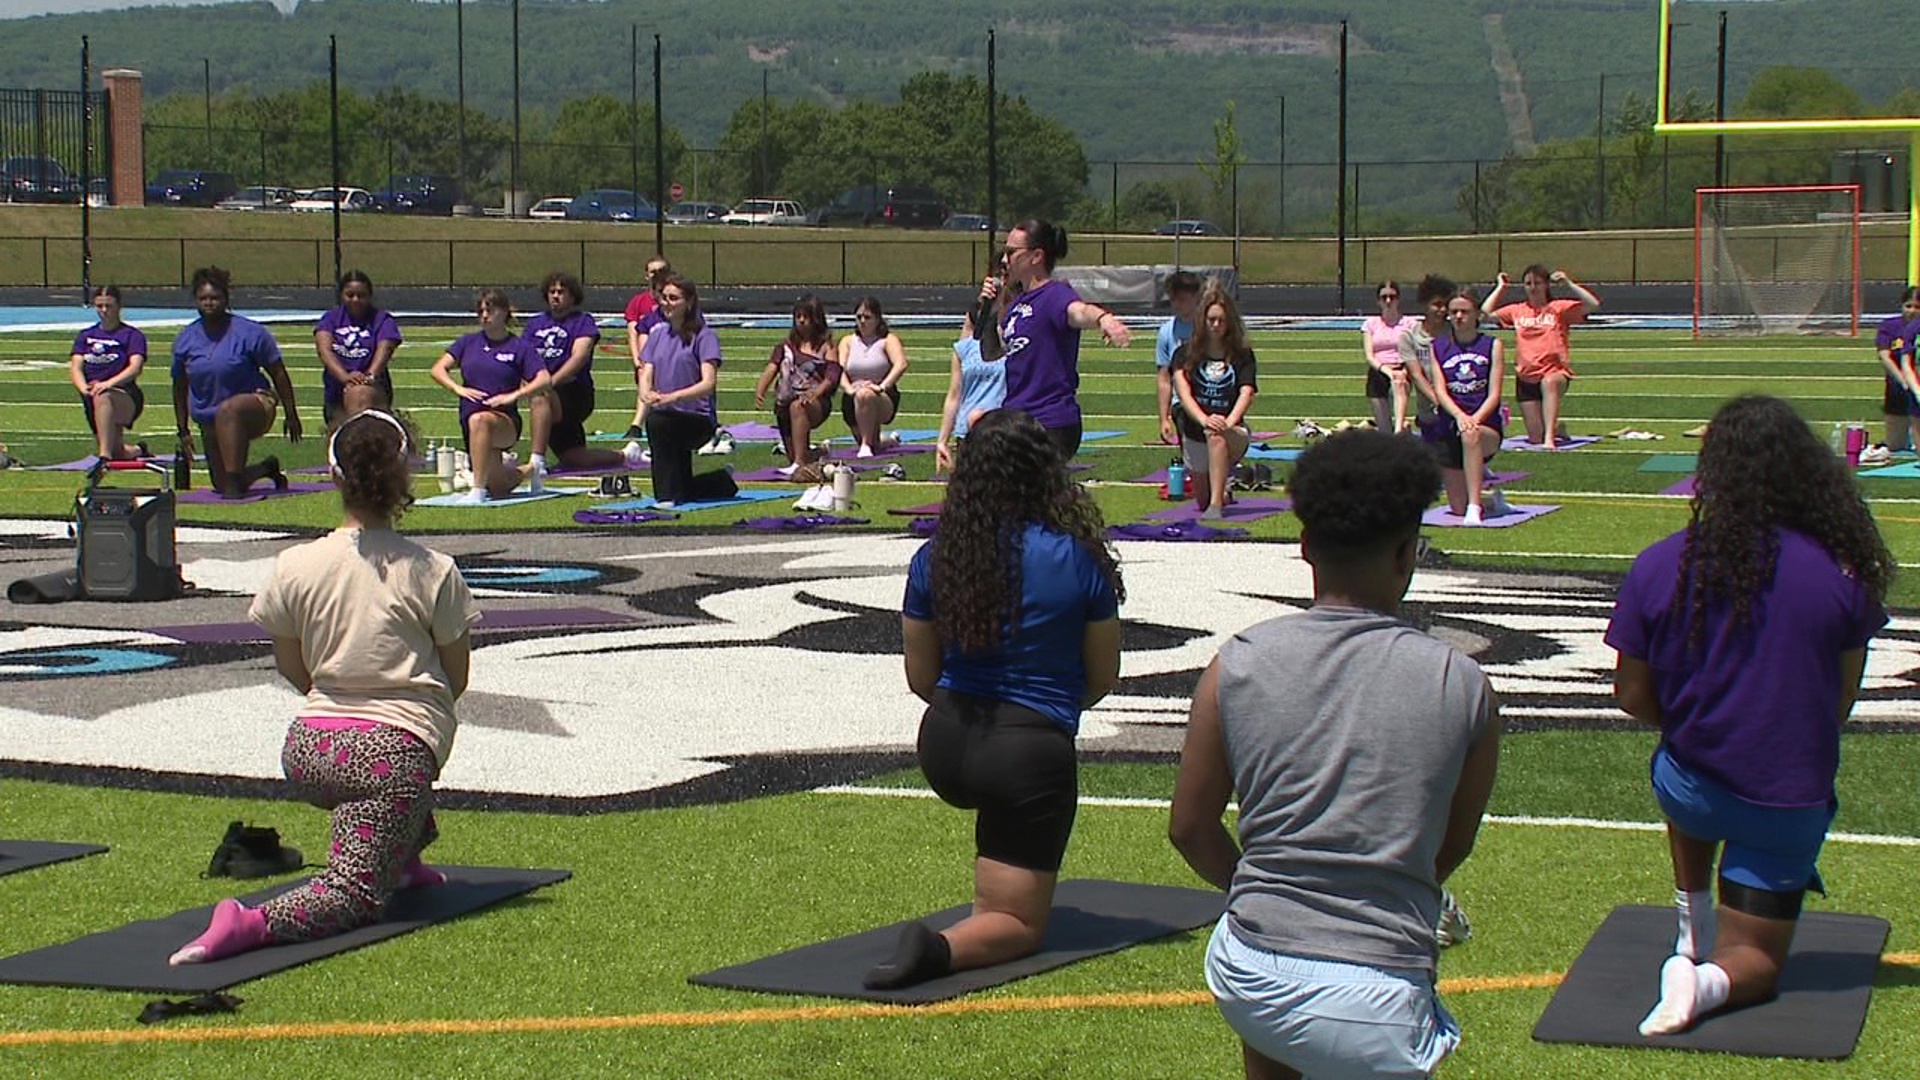 Newswatch 16's Emily Kress shows us how some high school students at Wilkes-Barre Area spent part of this sunny day.